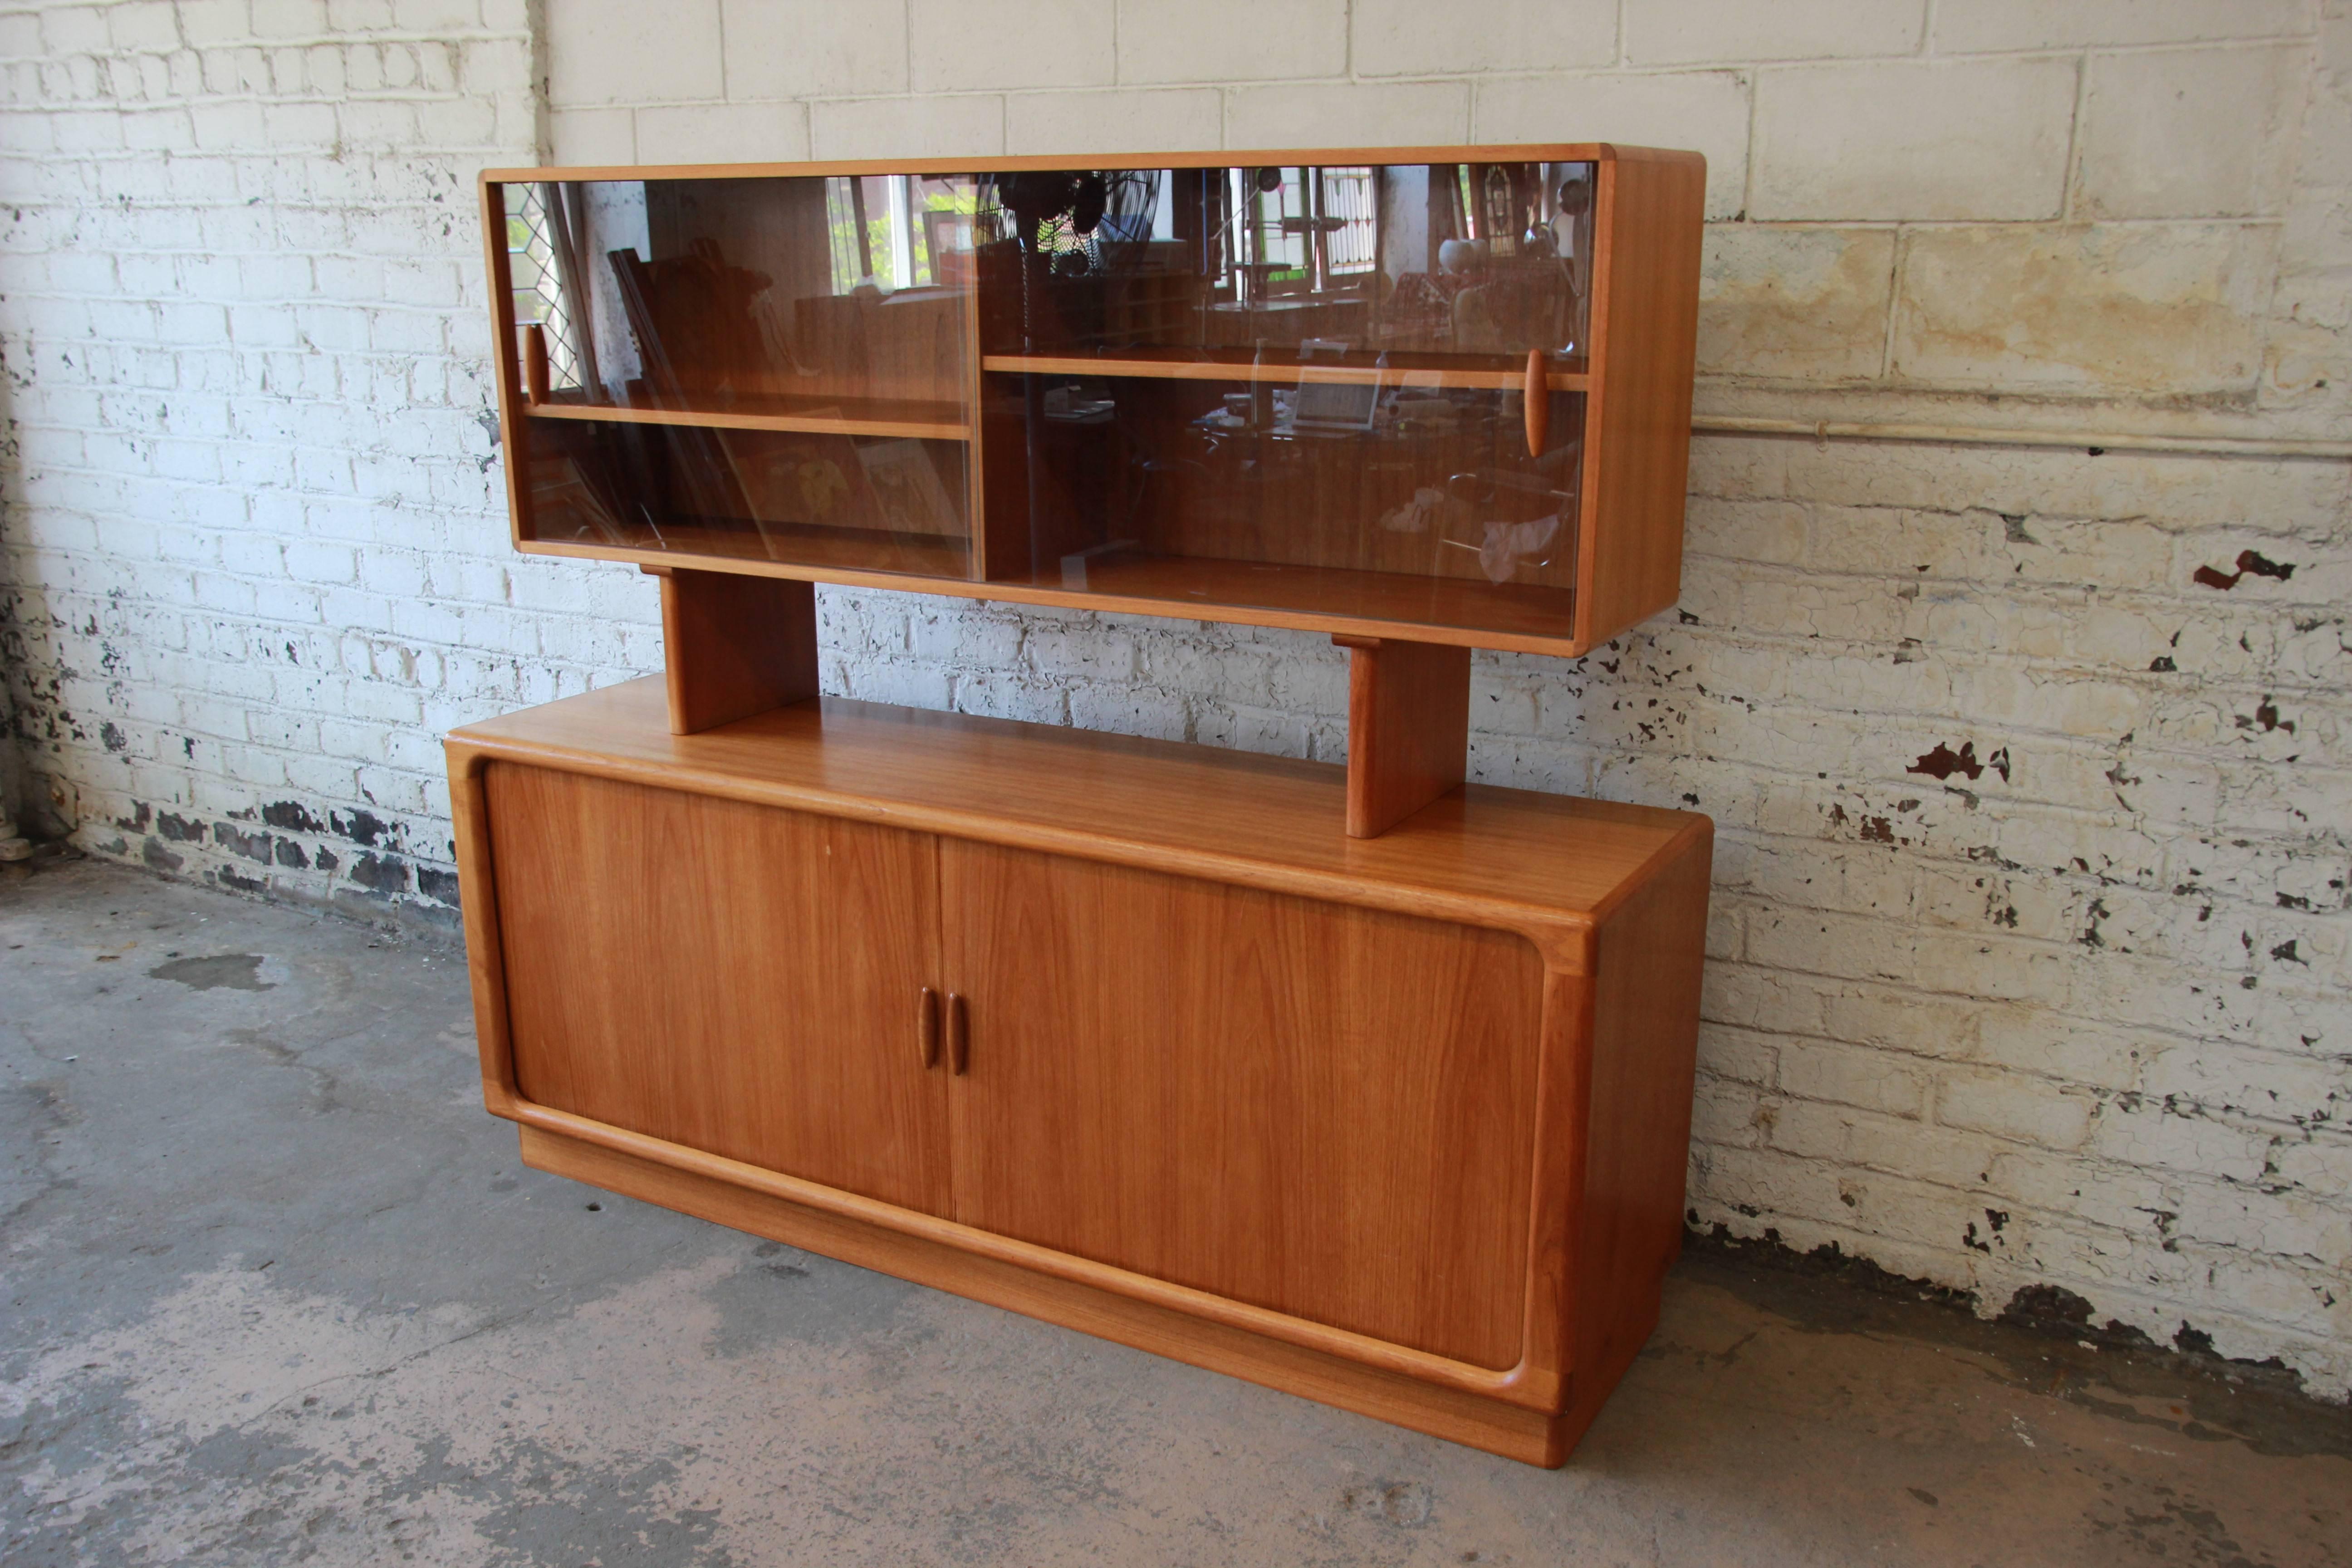 Vintage Danish modern teak credenza with glass-front top by Dyrlund. The long credenza has tambour doors that open up to five dovetailed drawers in the center. The right side has two adjustable shelves and the left a single adjustable shelf. The top